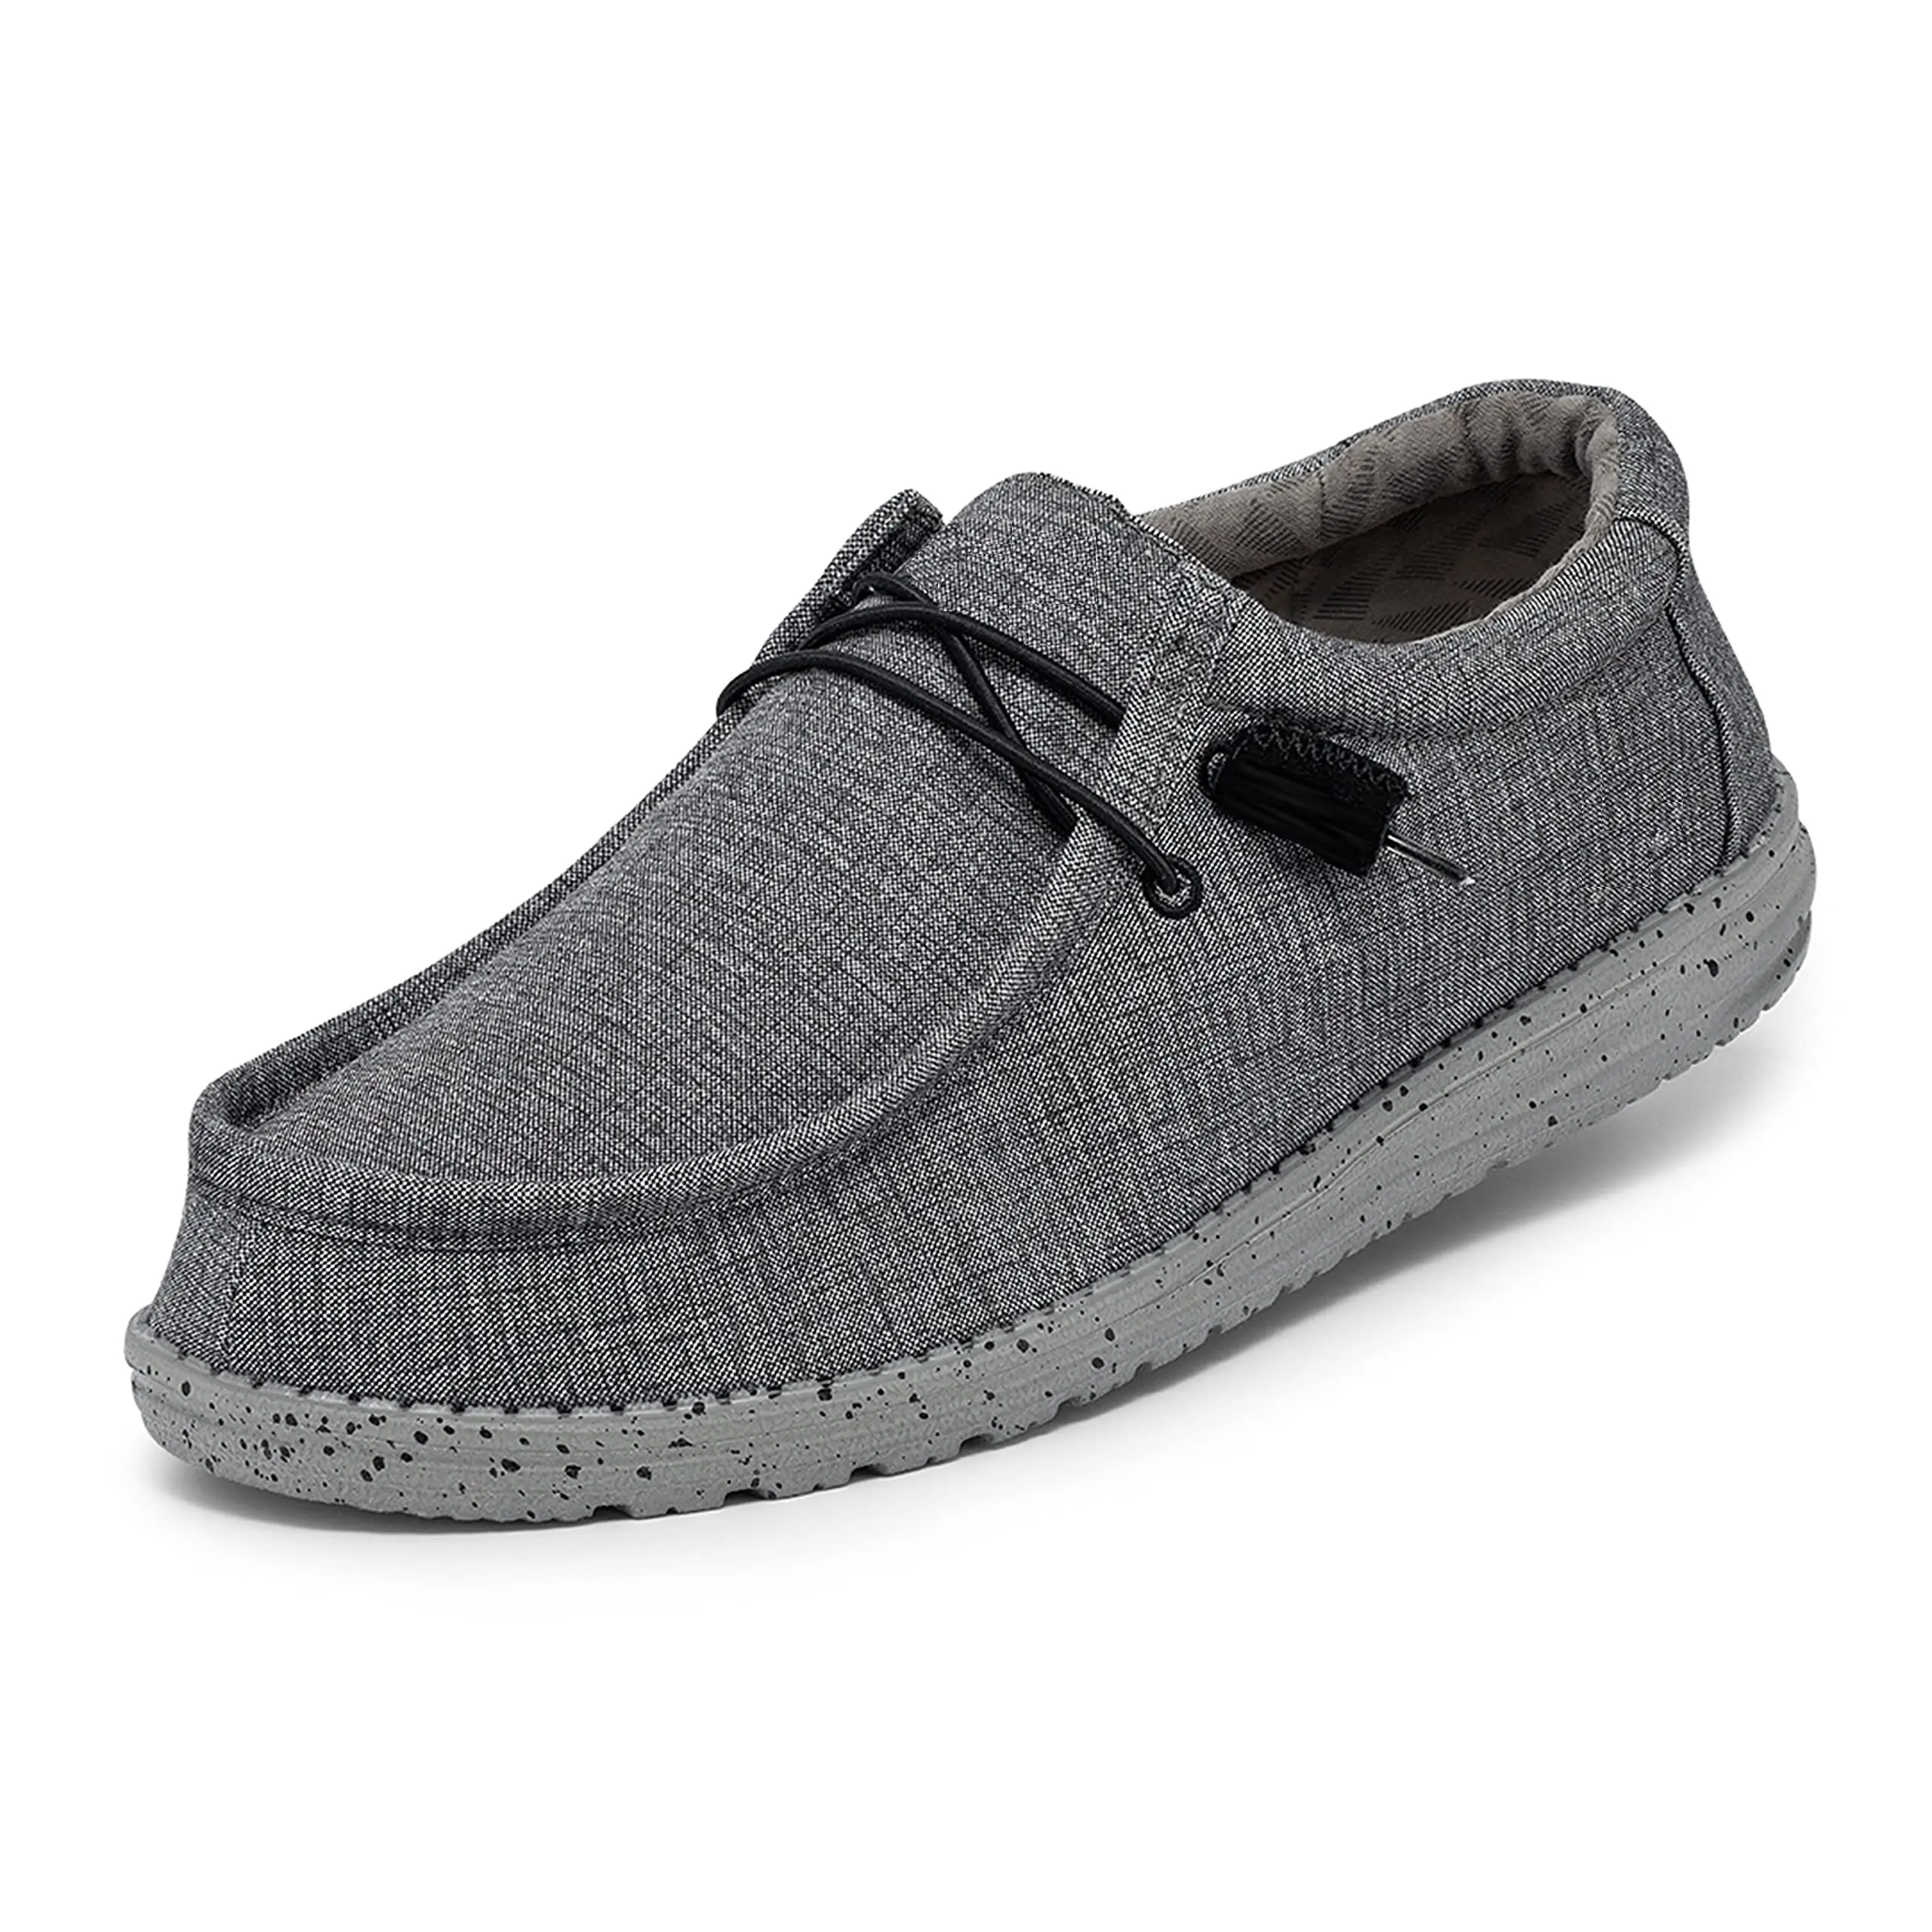 2023 New Men's Lace up Slip-on shoe Breathable, Simple, Comfortable and Light Sneakers